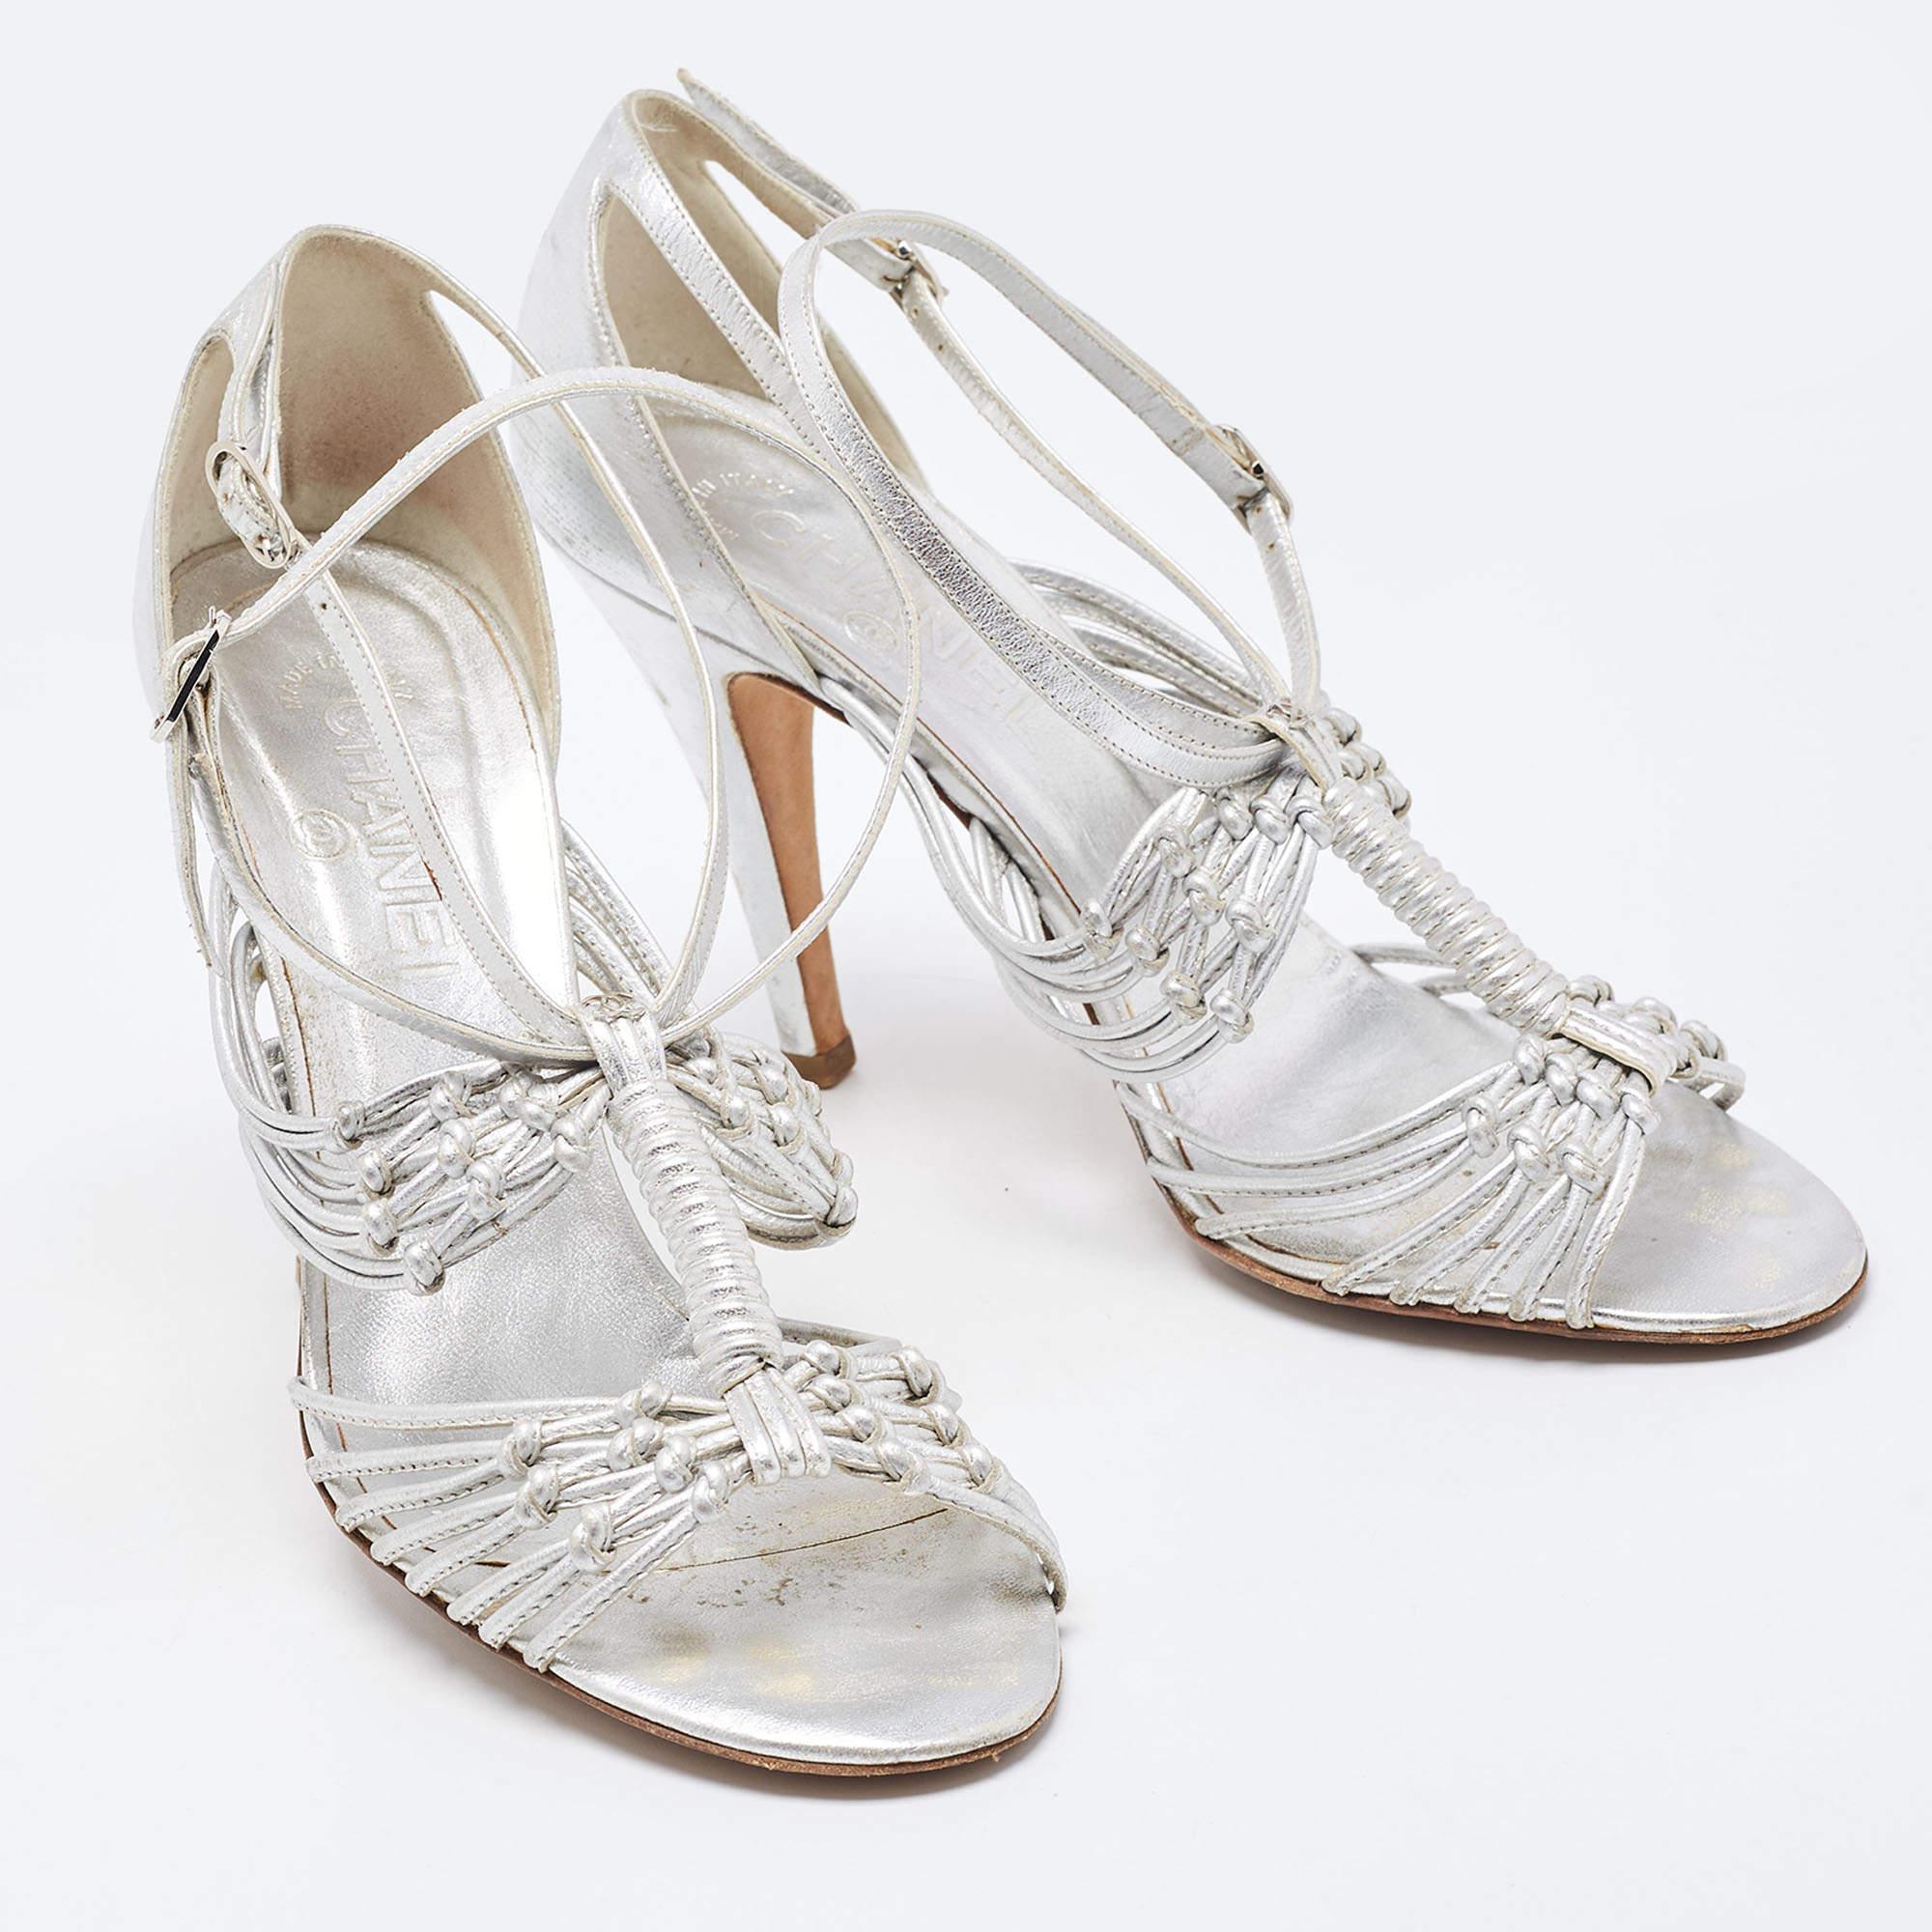 Chanel Silver Knotted Leather CC Ankle Strap Sandals 38.5 In Good Condition For Sale In Dubai, Al Qouz 2